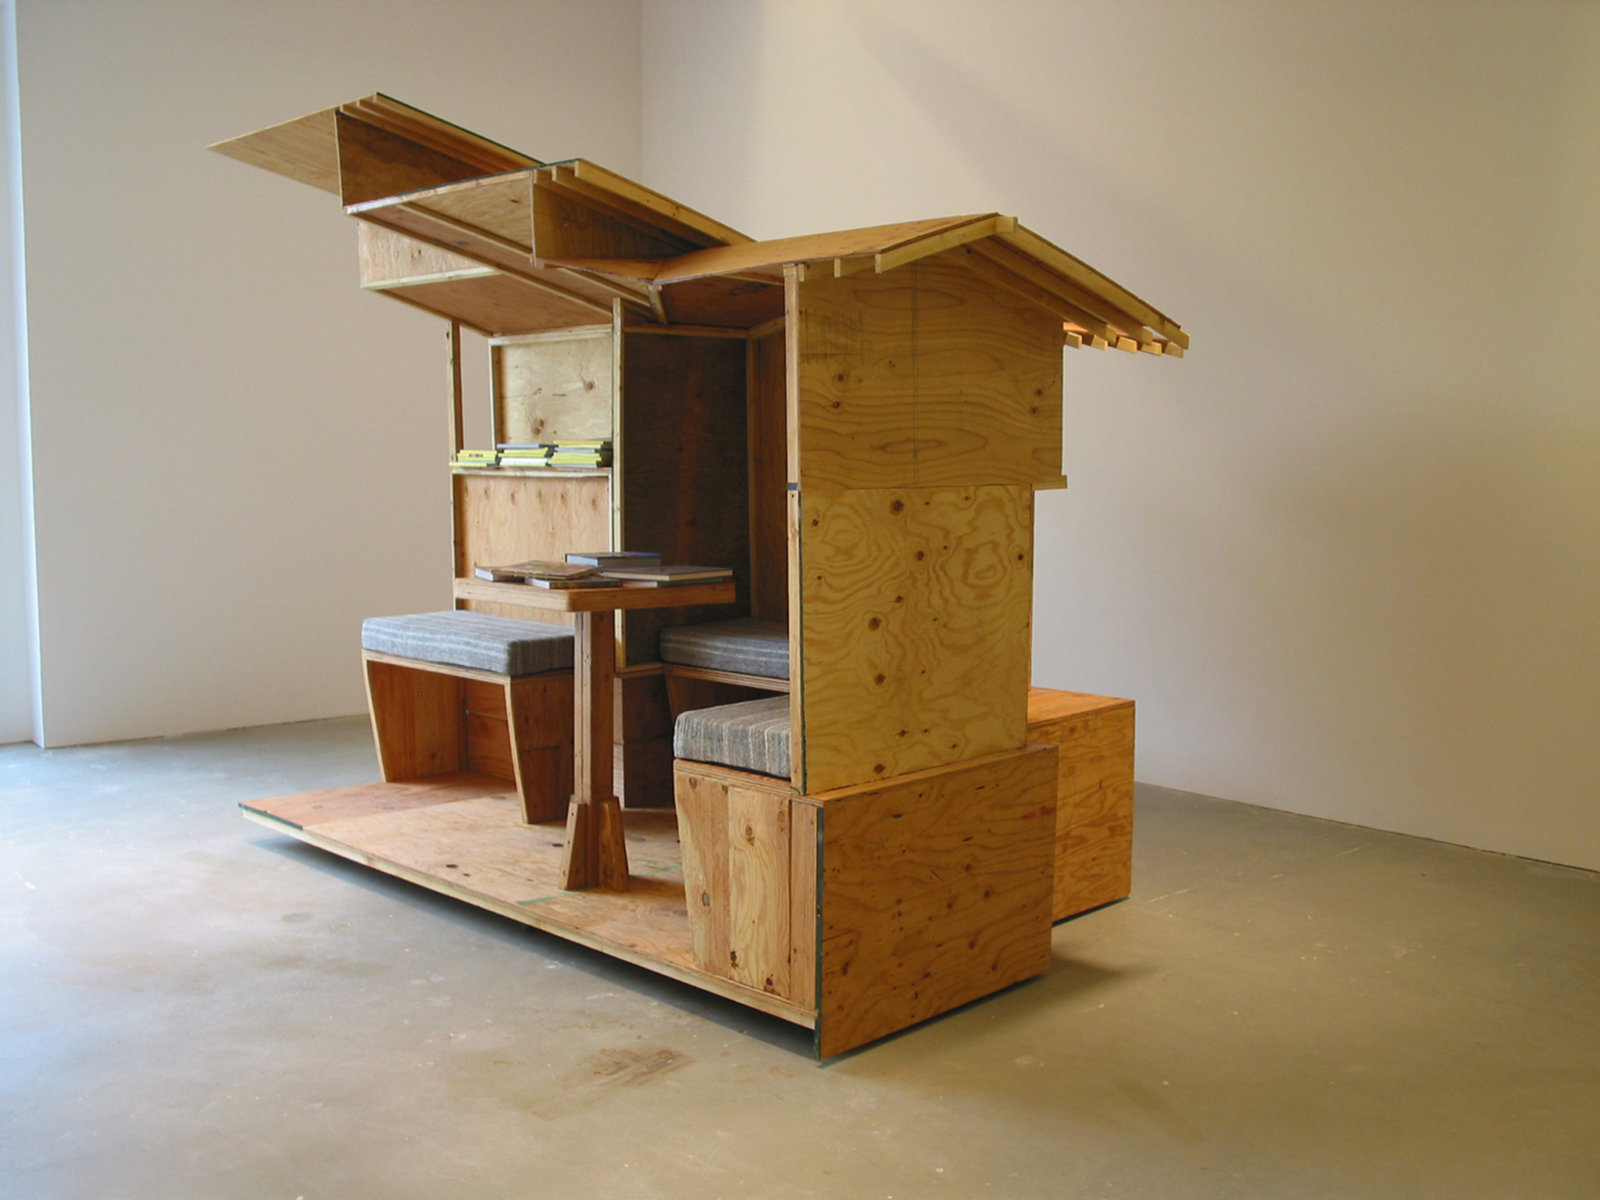 Brian Jungen, Arts and Crafts Book Depository / Capp Street Project 2004, 2004, architectural model (scale of Greene and Greene's Gamble House) made of plywood sectioned into 4 quadrants, locking castors, bookshelves, 2 framed glass cabinets with electrical source and lighting unit, hand-made fabric pillows for seating benches, video monitor, ongoing accumulation of library inventory of magazines, journals, books and videos, 108 x 192 x 252 in. (274 x 488 x 640 cm)